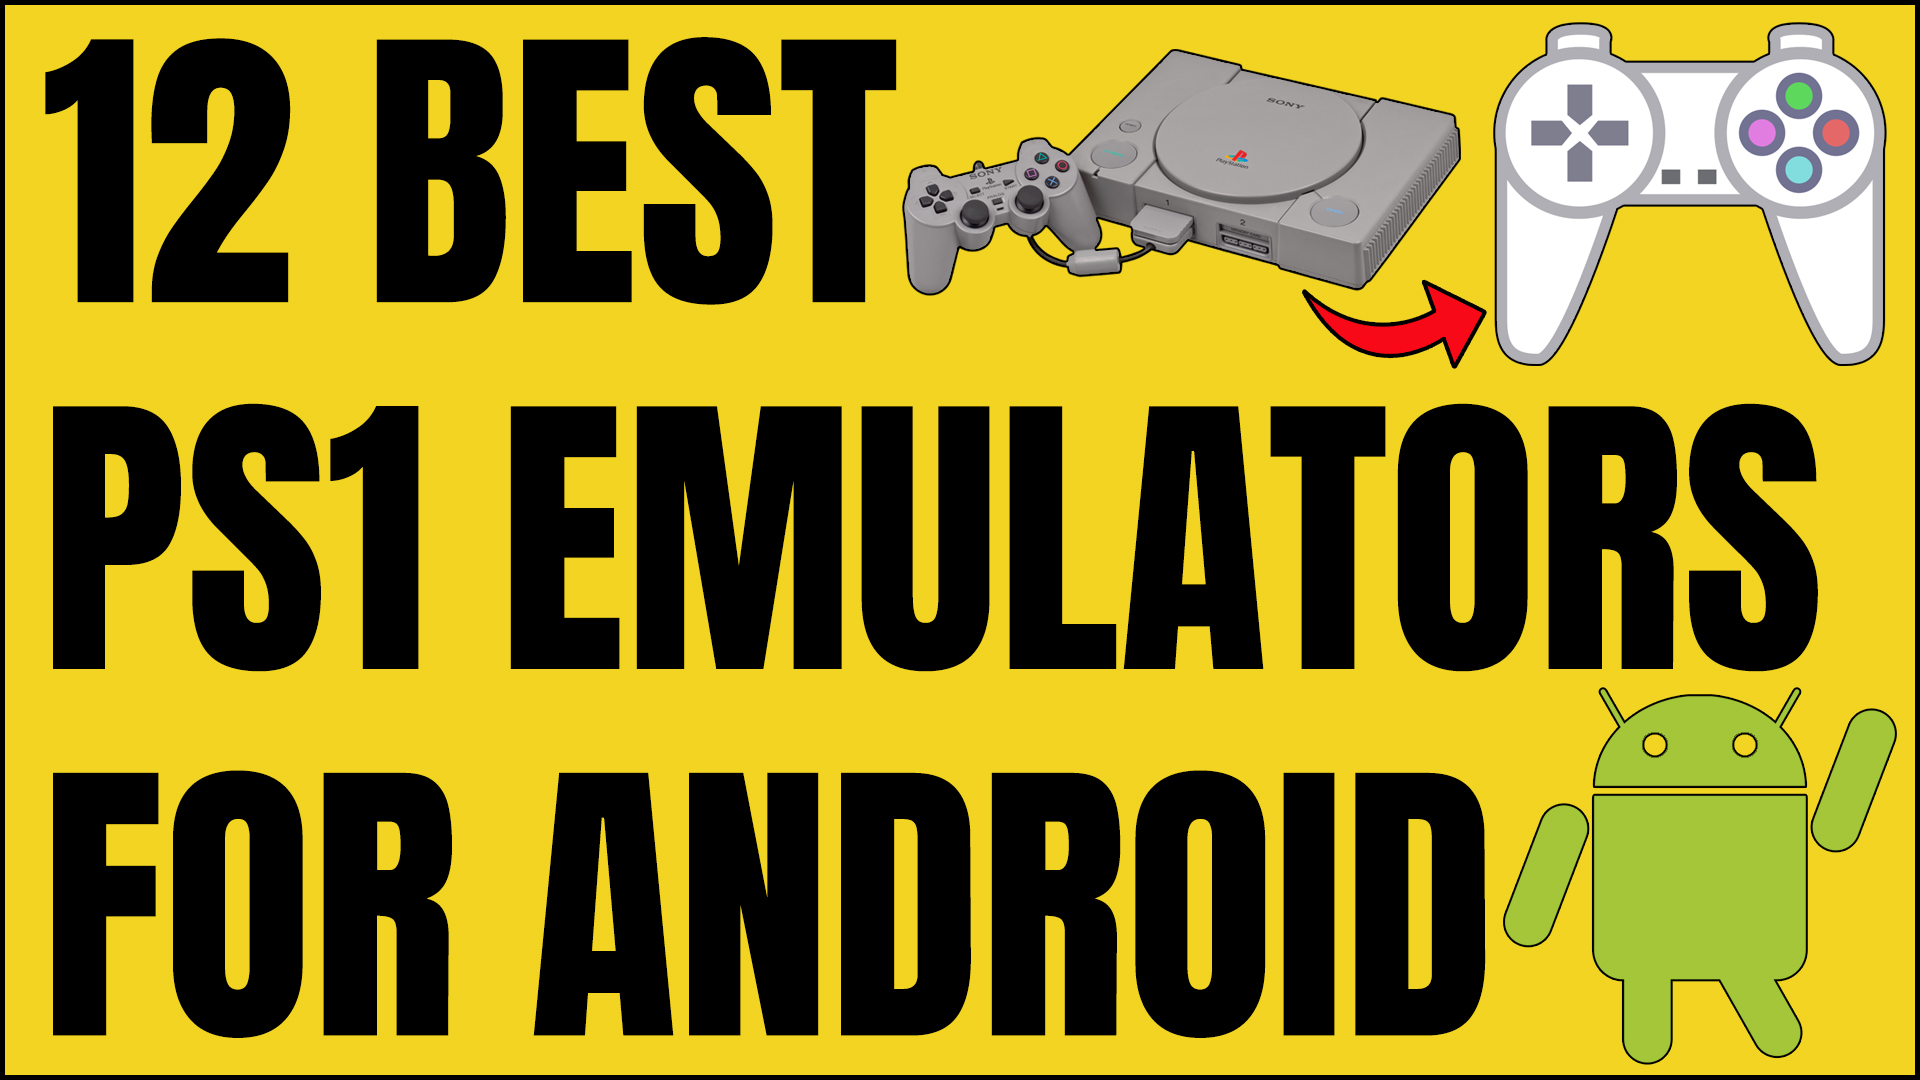 12 Best PS1 Emulators For Android